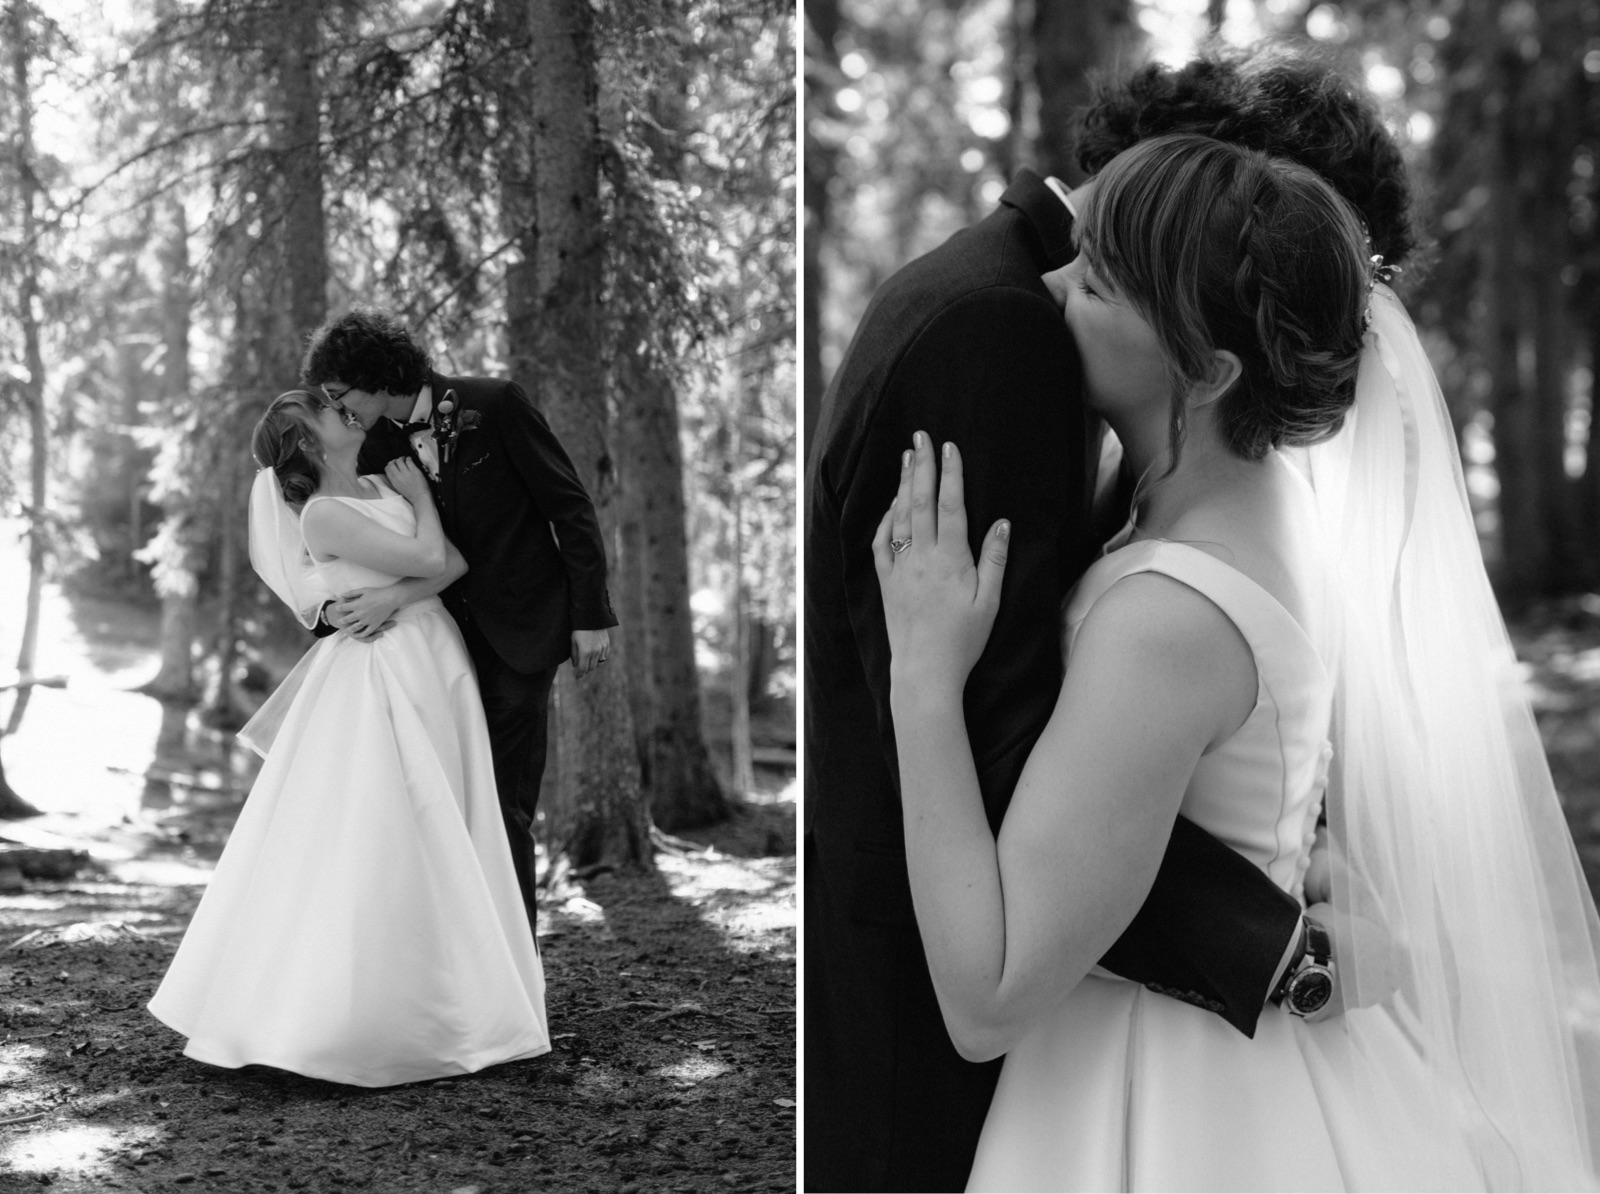 Sibbald creek wedding portraits in a forest